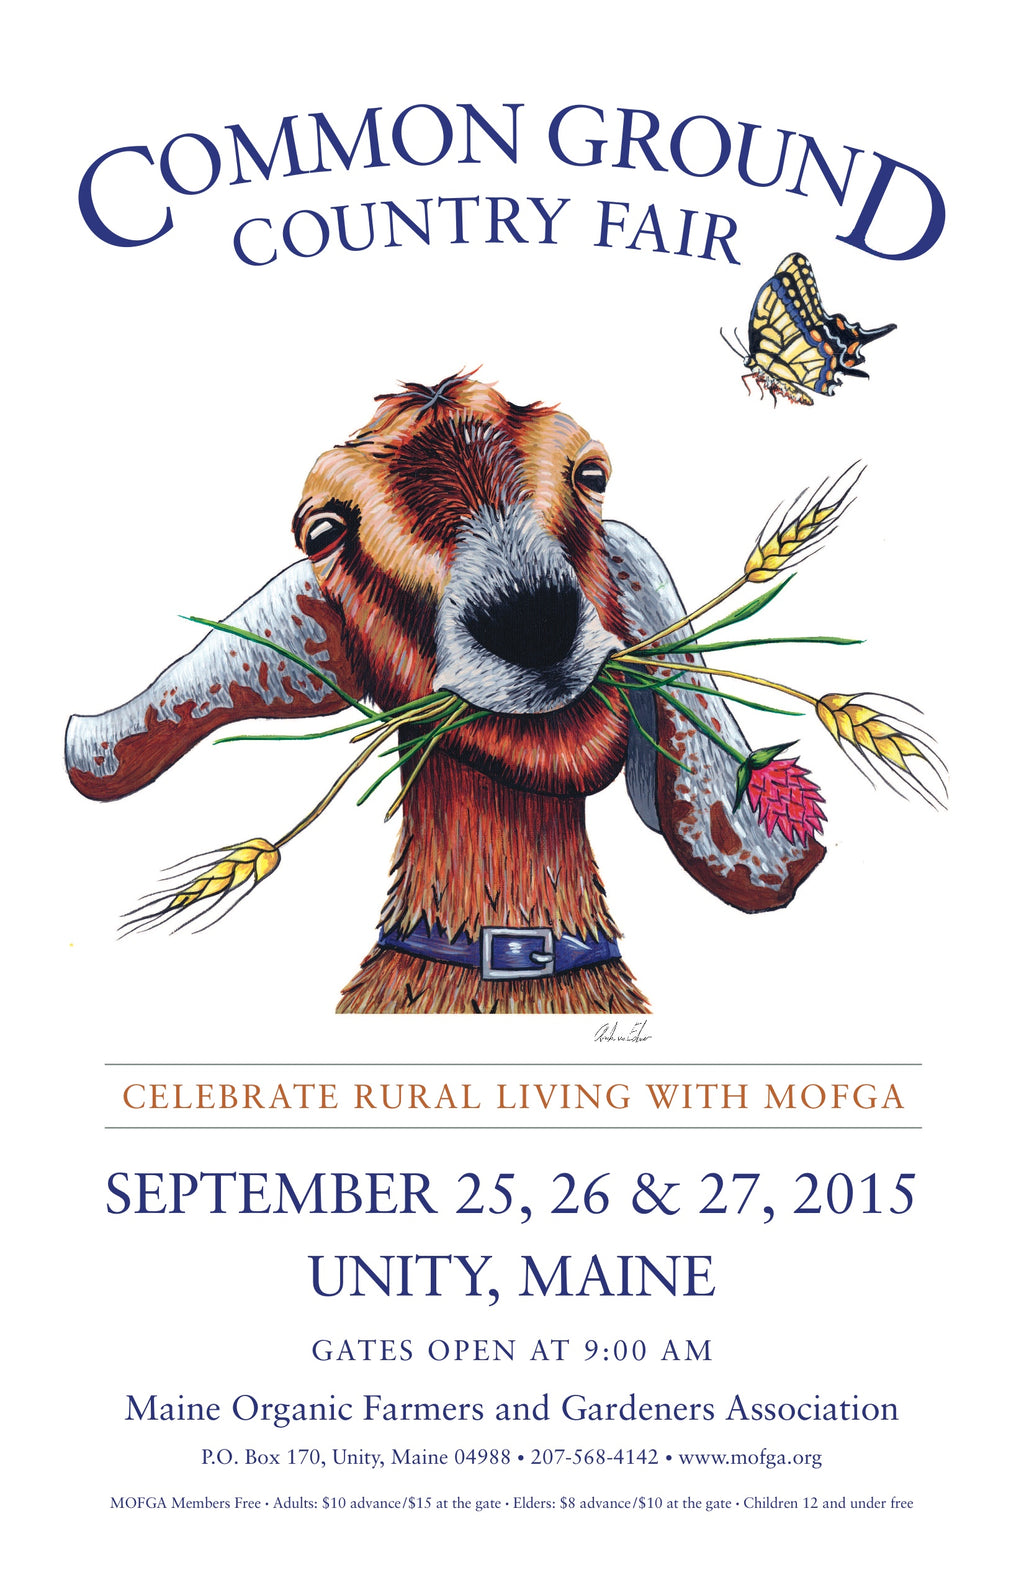 A white rectangular poster with artwork in the center depicting the head of a brown, black, and grey striped goat with long ears, munching on a couple stalks of grain and clover. By the top right of the goat’s head a yellow, black, and orange butterfly is in flight. Dark blue text at the top reads “Common Ground Country Fair”. In the bottom of the art more text in brown reads “Celebrate Rural Living with MOFGA” and underneath in black text are fair dates and MOFGA contact info.